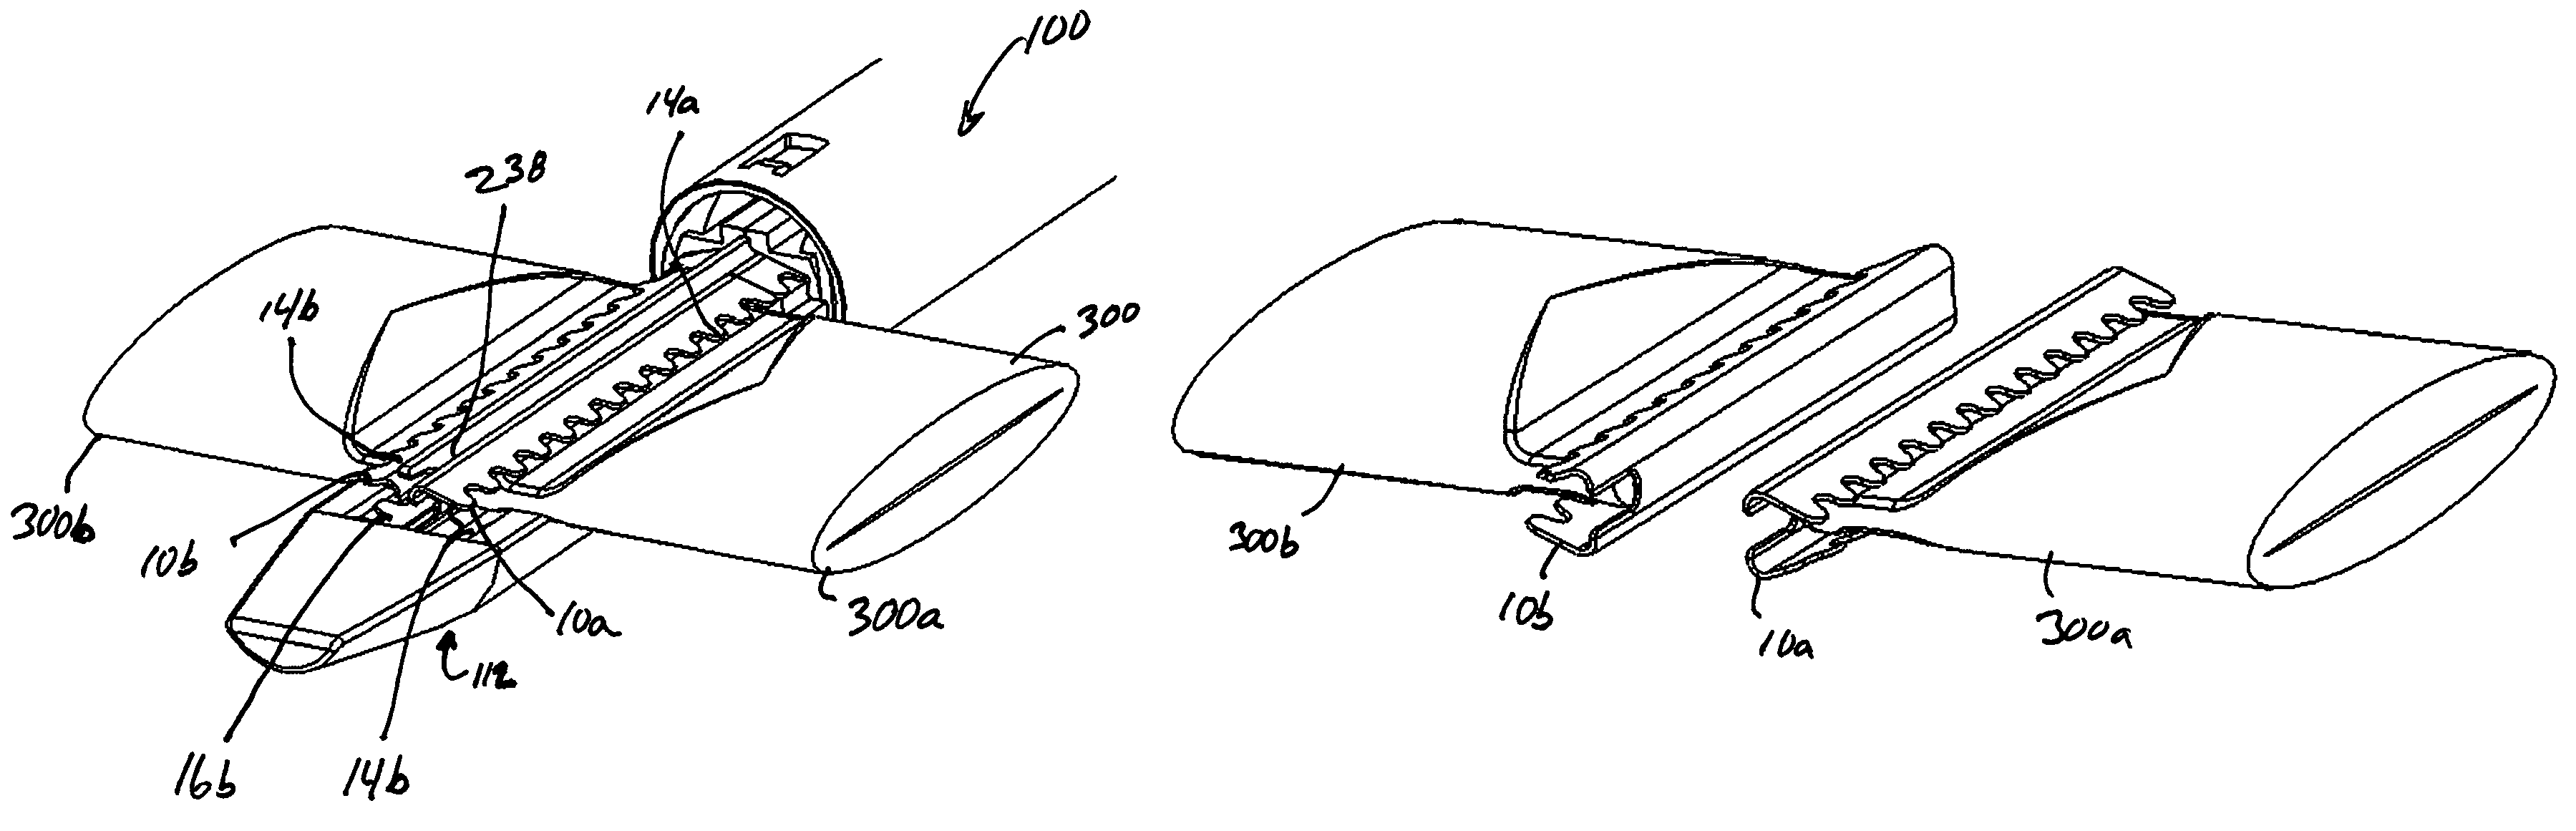 Surgical clip and applier device and method of use